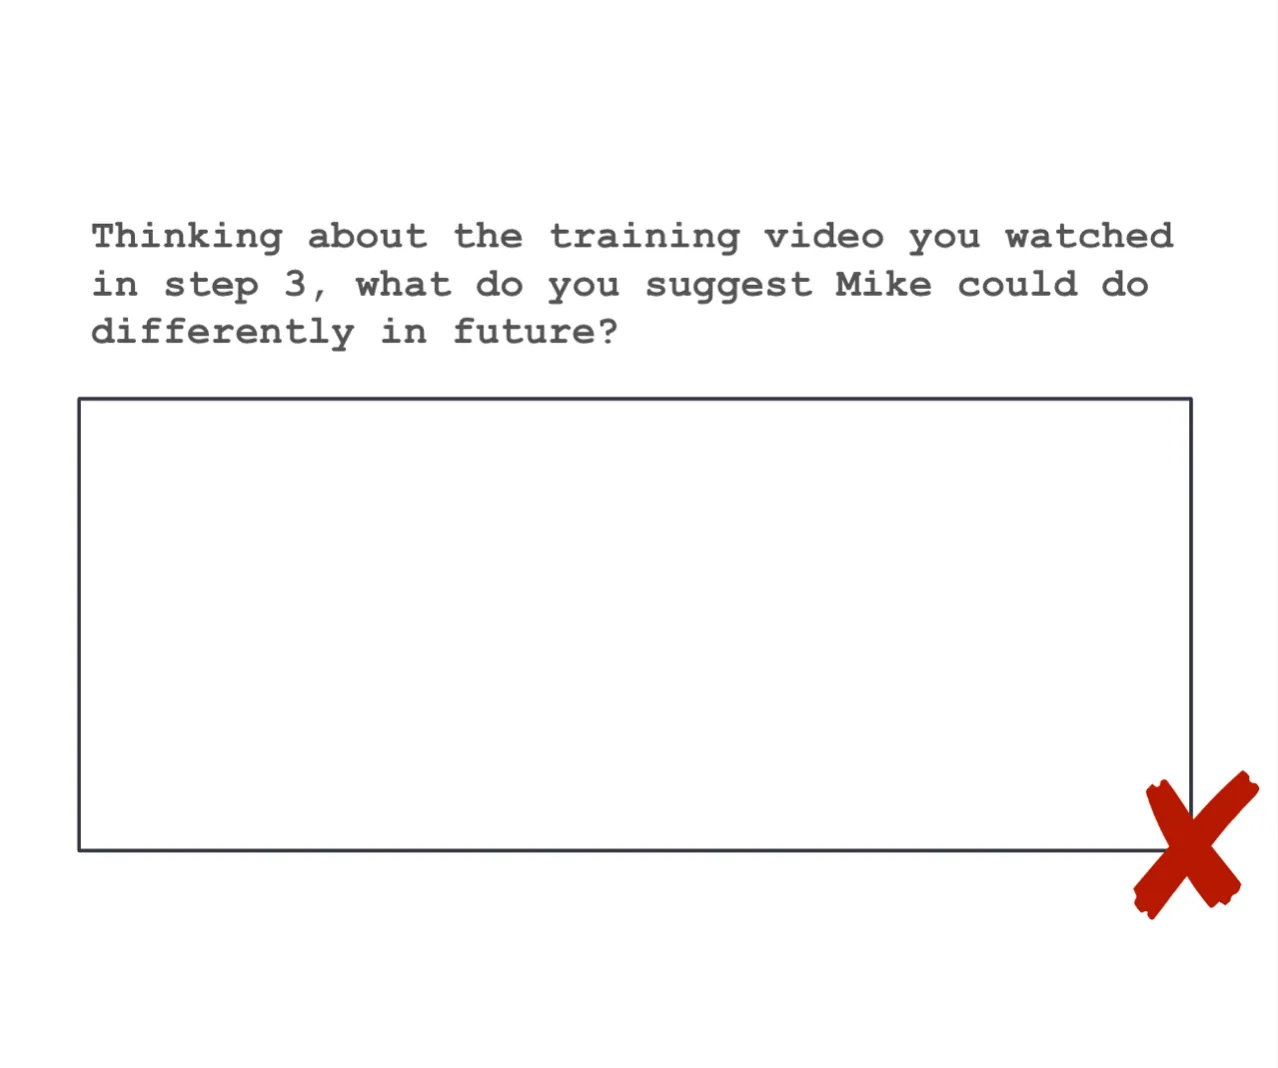 A textarea for user input. The label reads: Thinking about the training video you watched in step 3, what do you suggest Mike could do differently in future?